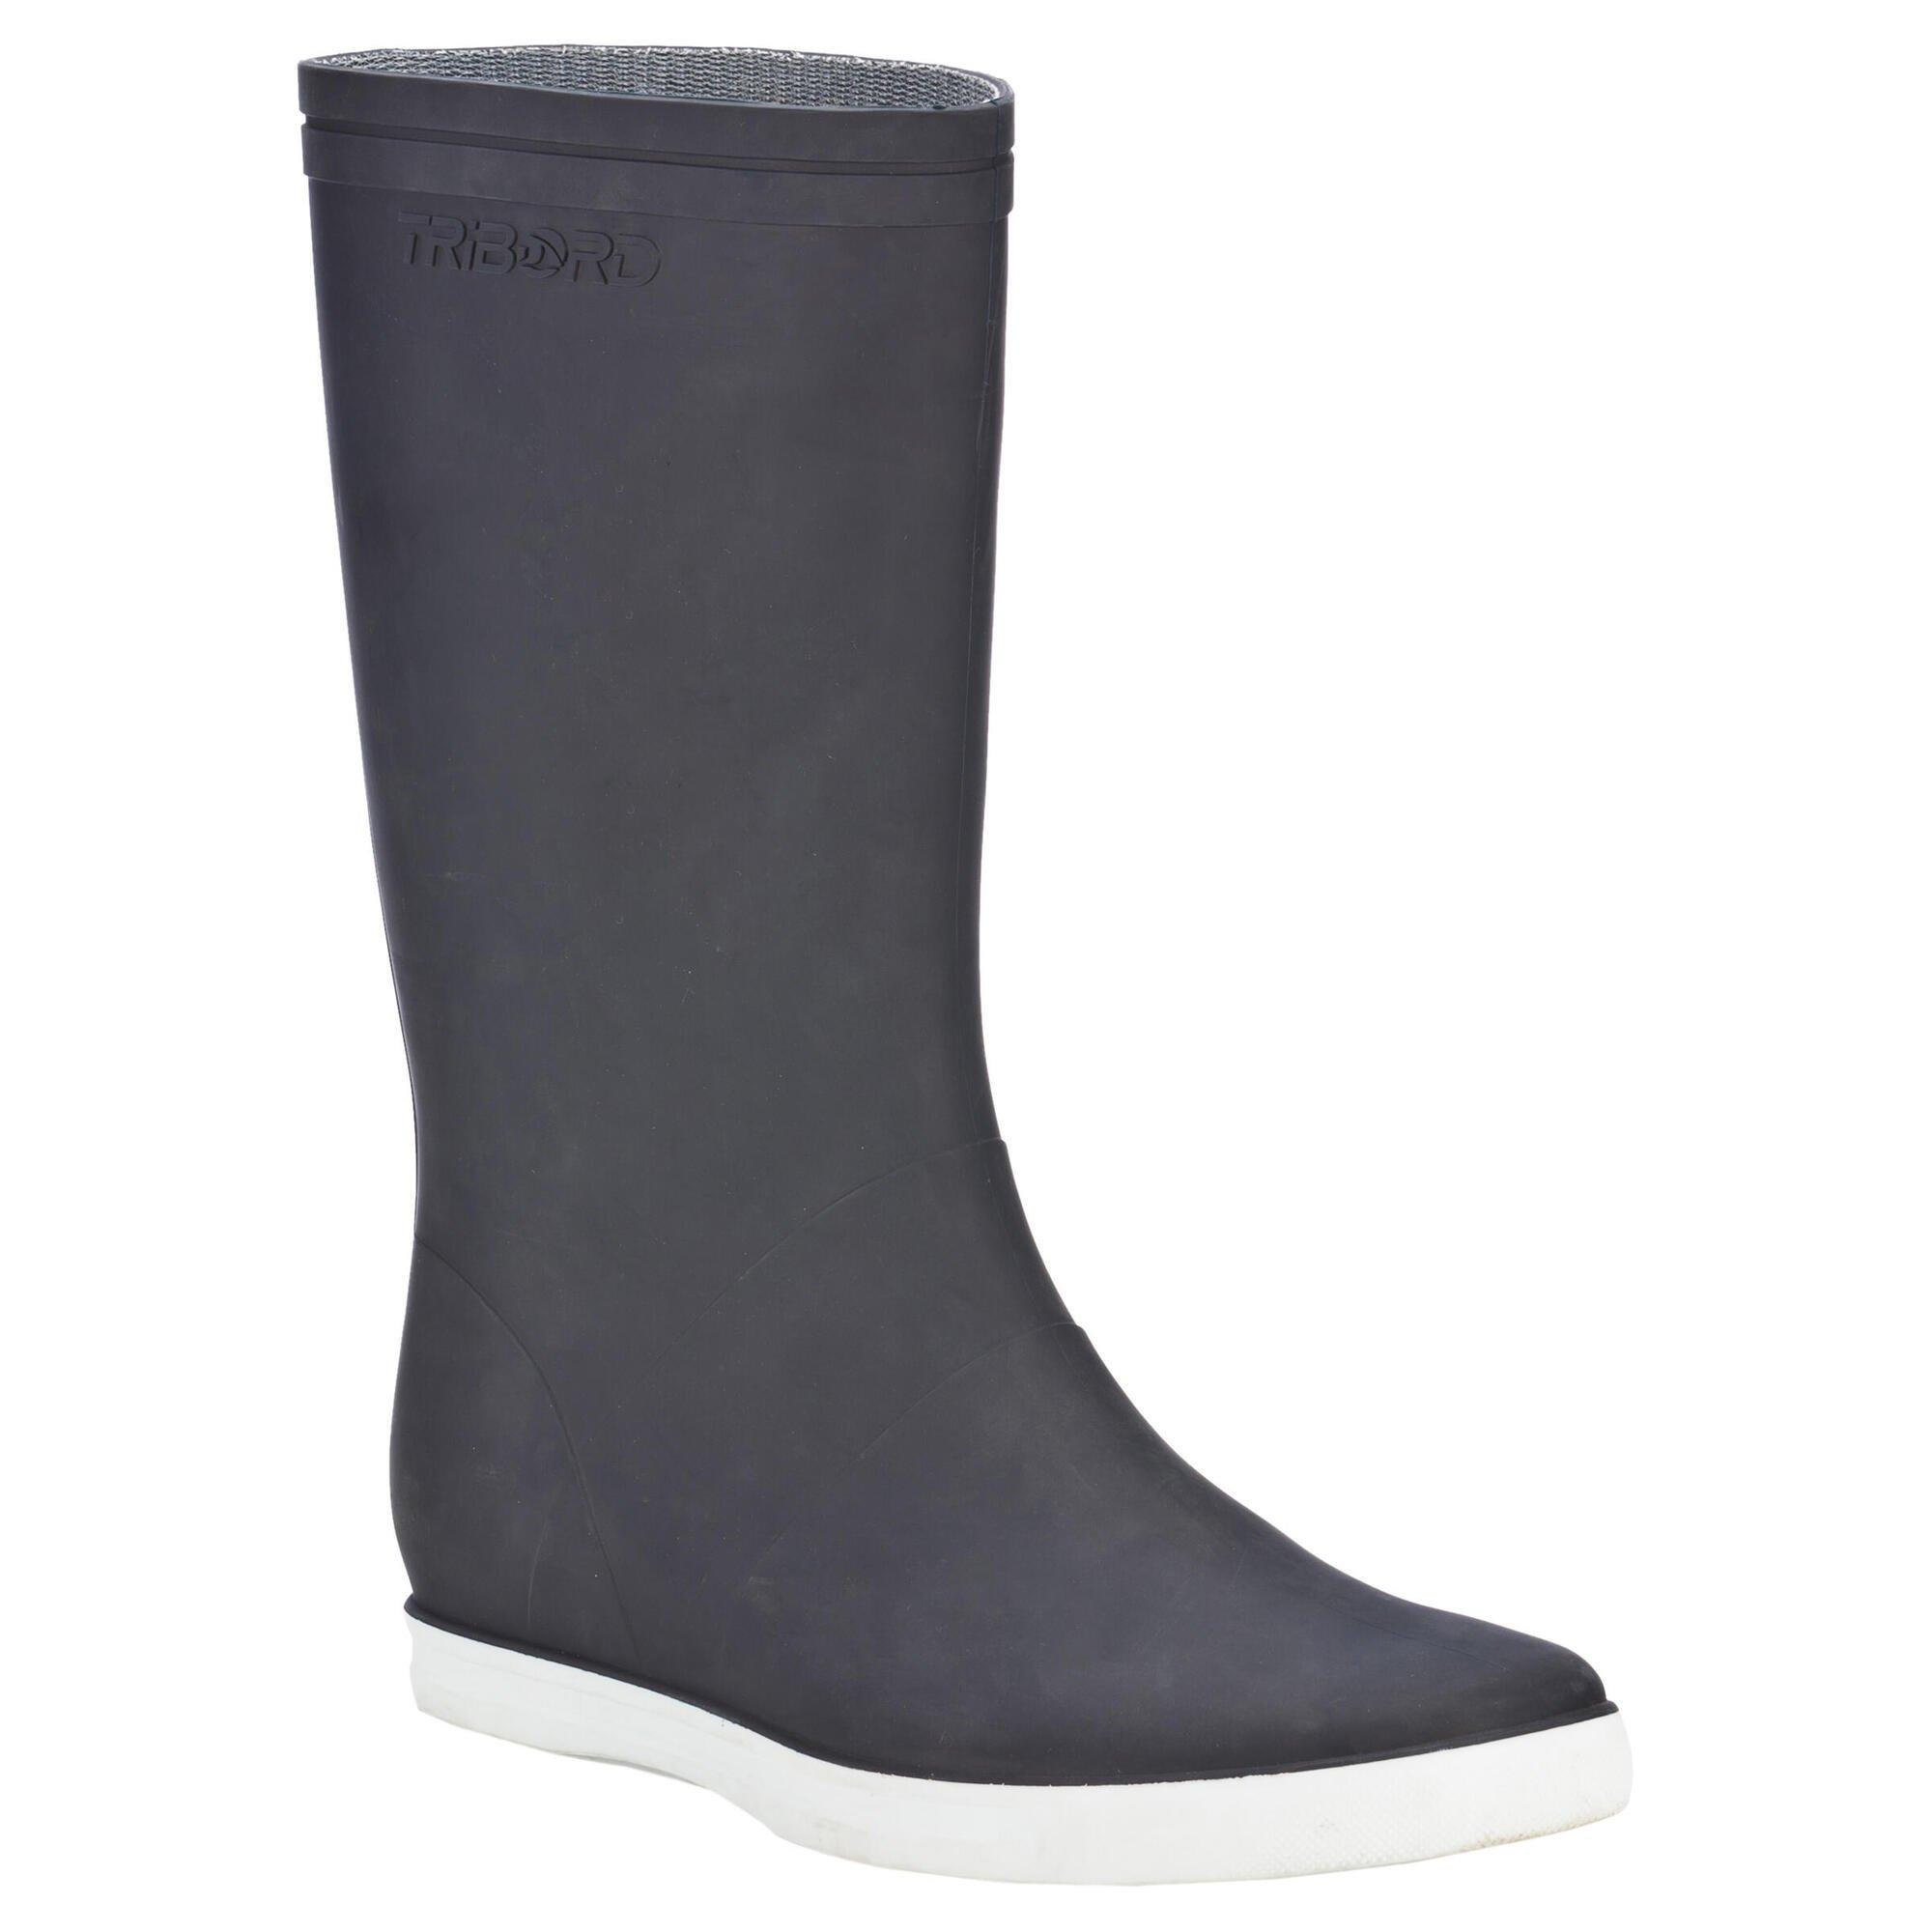 Boots | Decathlon Sailing 100 Adult Wellies | Tribord